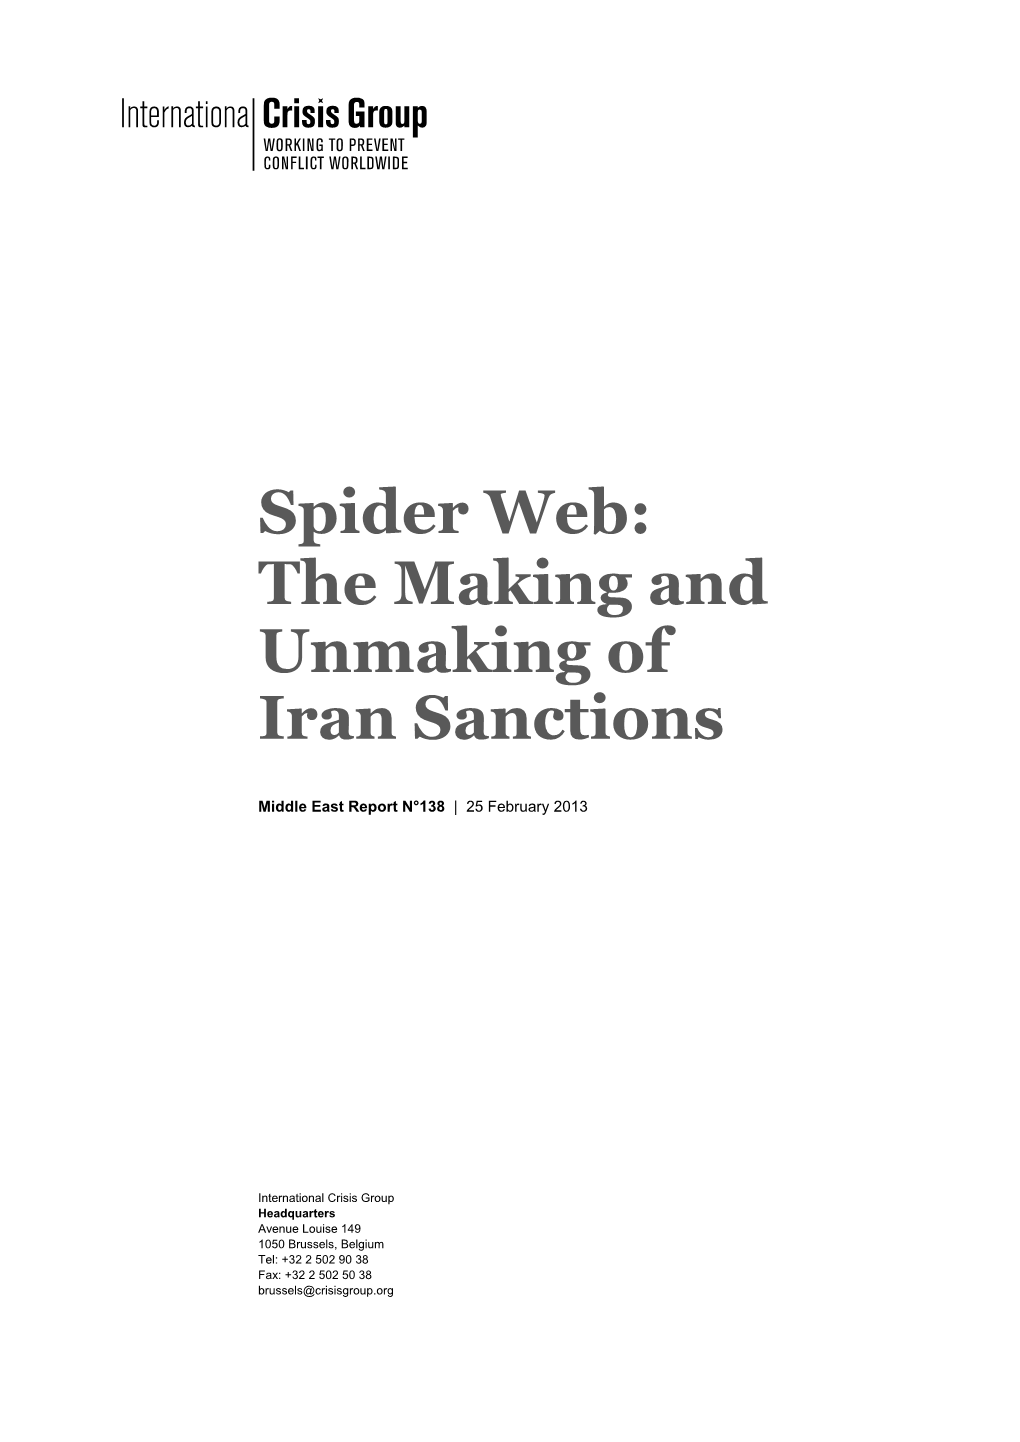 Spider Web: the Making and Unmaking of Iran Sanctions